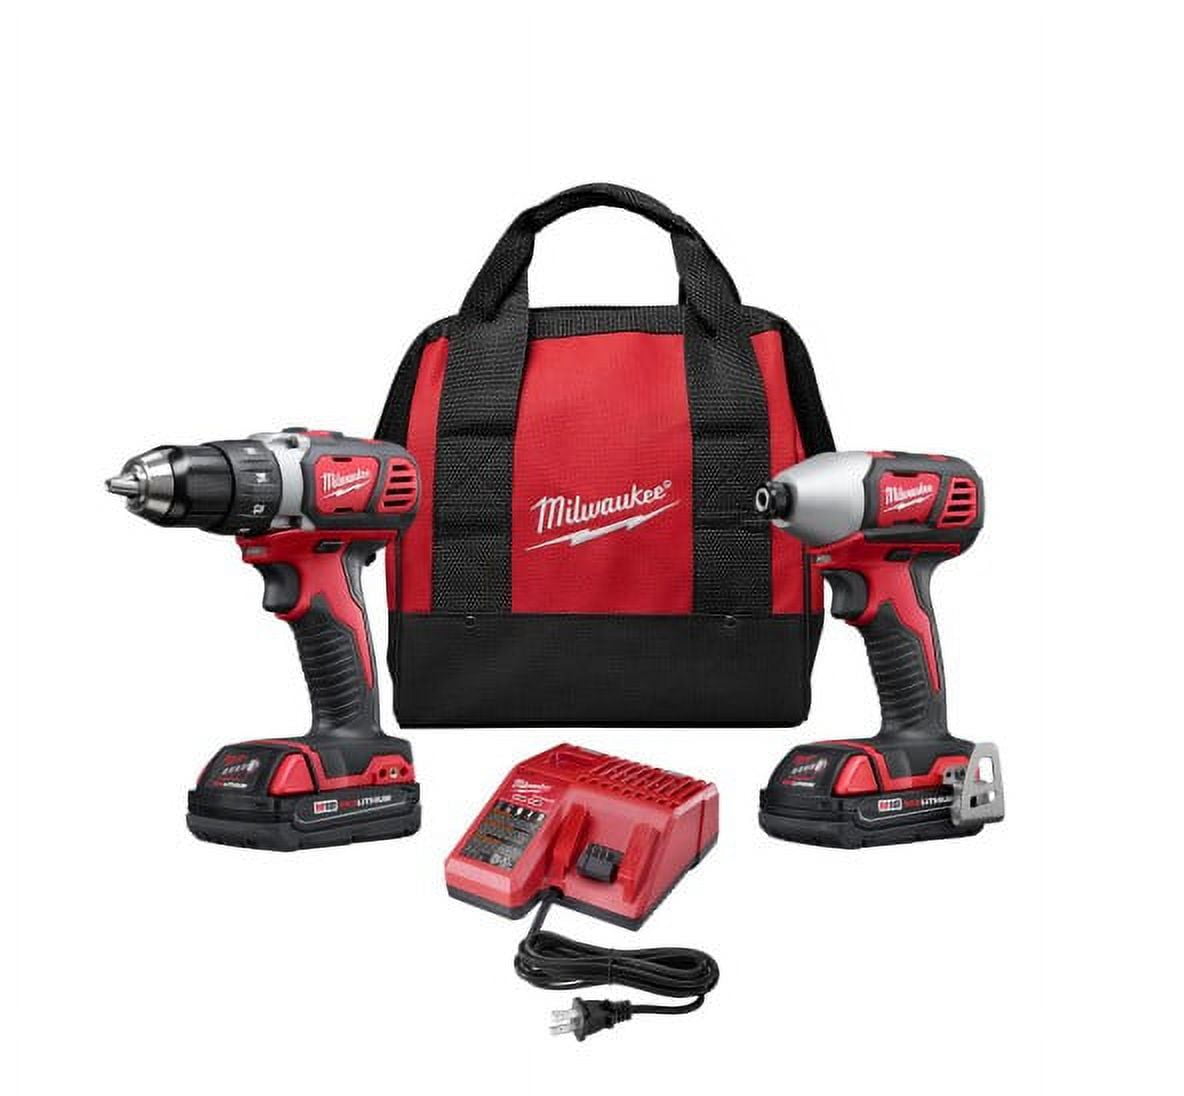 Milwaukee M18 Fuel One-Key 18-Volt Lithium-Ion Cordless Rivet Tool Kit with Two 2.0 Ah Batteries, Charger and Protective Boot